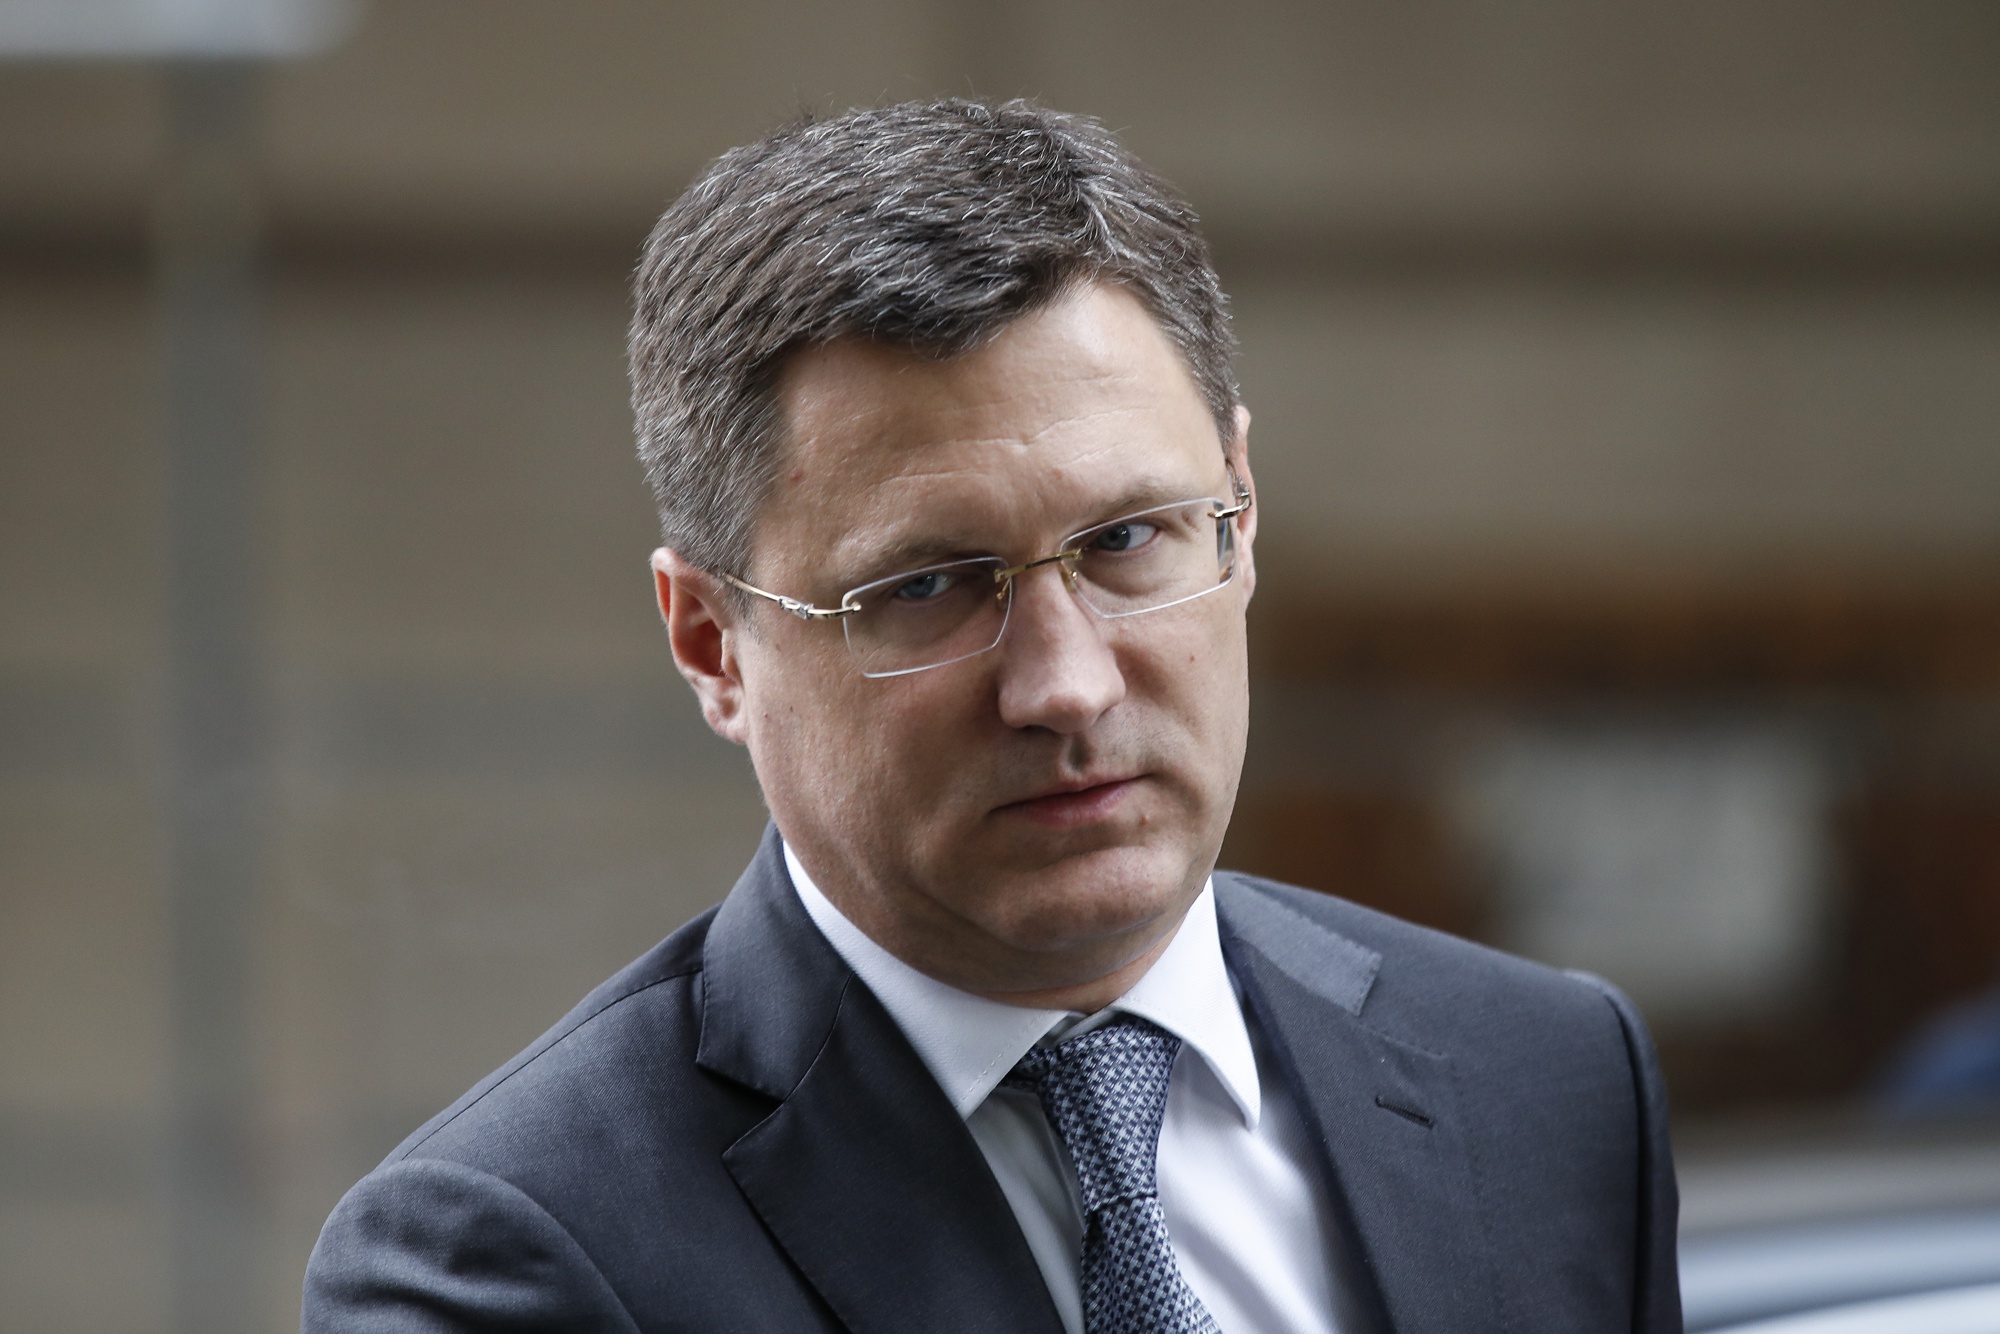 Russian Energy Minister Novak Said to Meet Oil CEOs Monday - Bloomberg